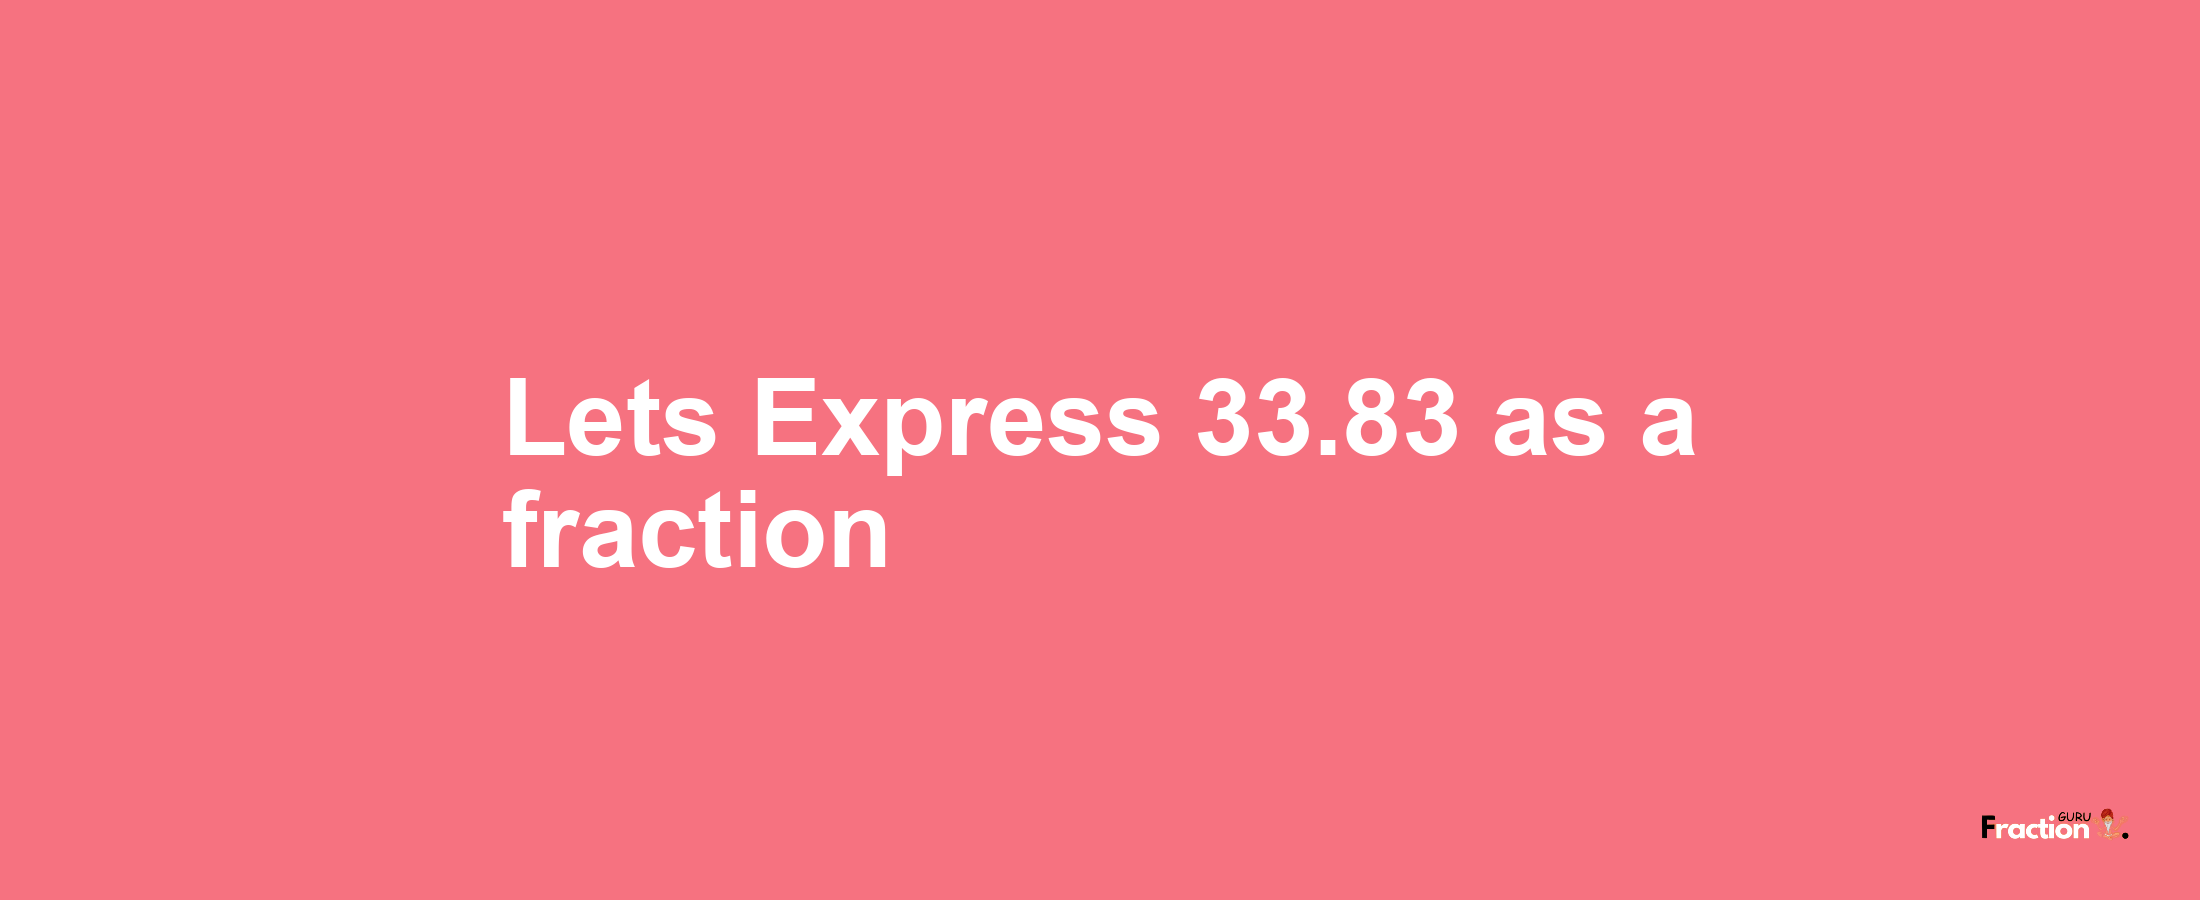 Lets Express 33.83 as afraction